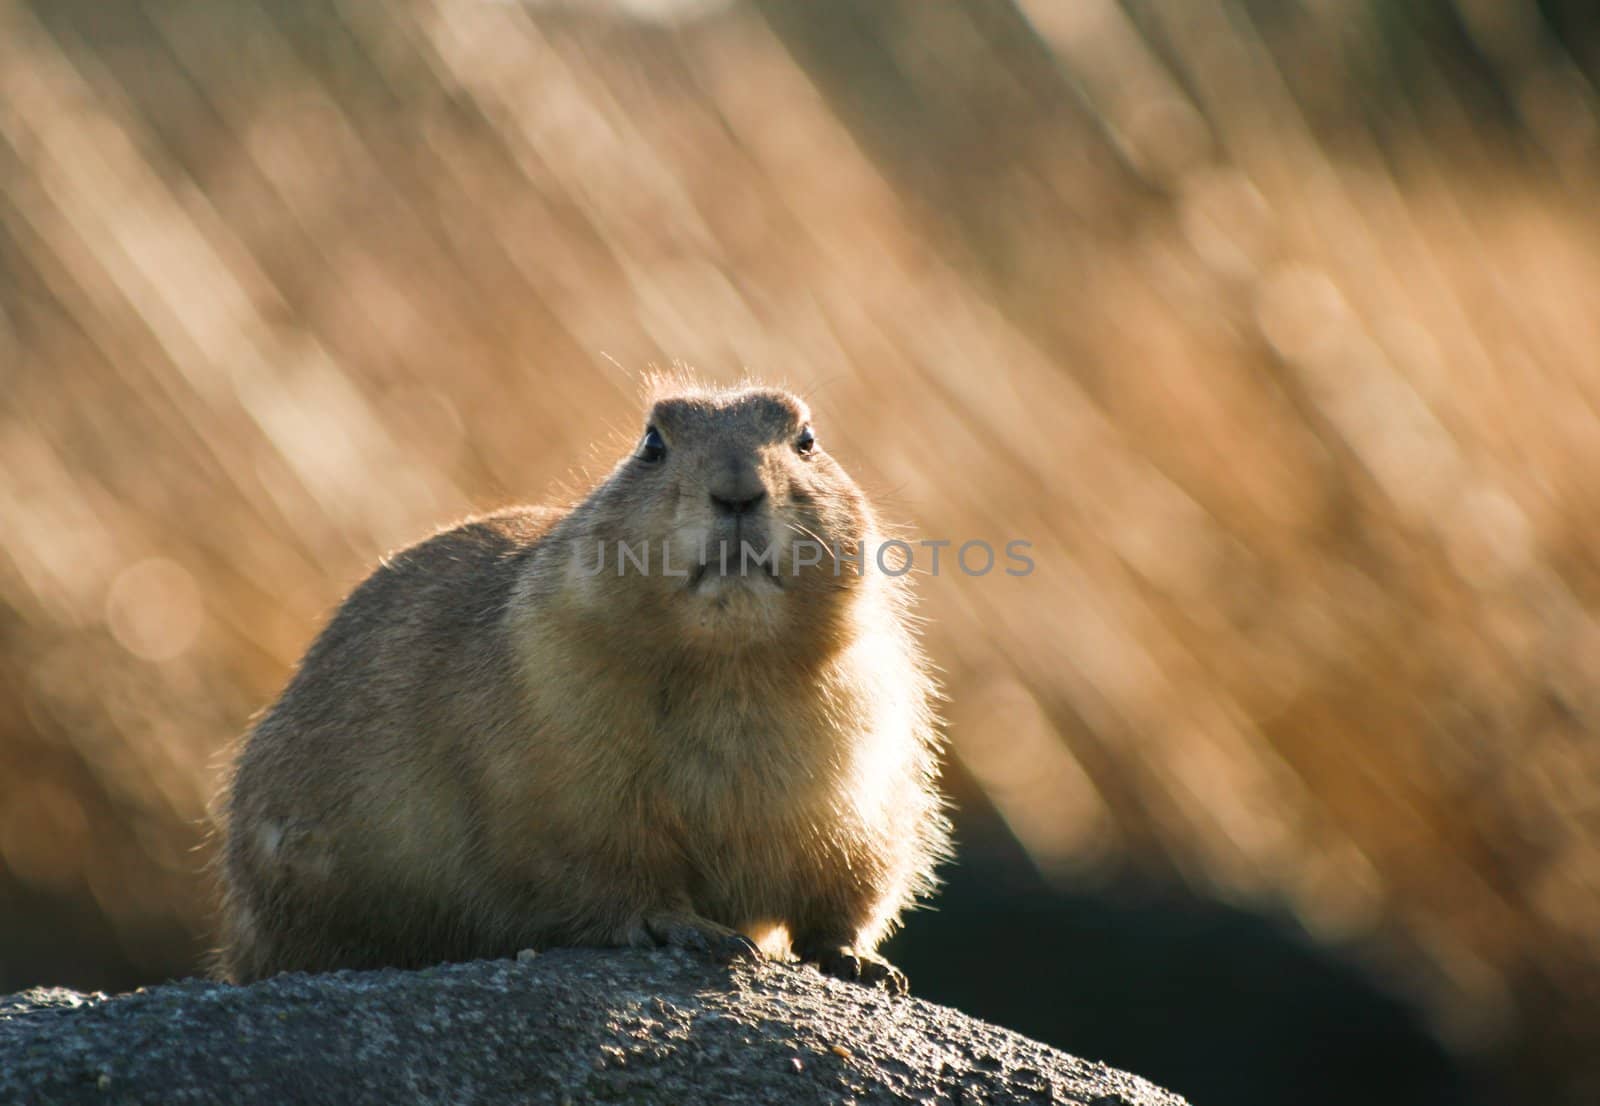 Prairiedog in the winter sun with dry grass in background